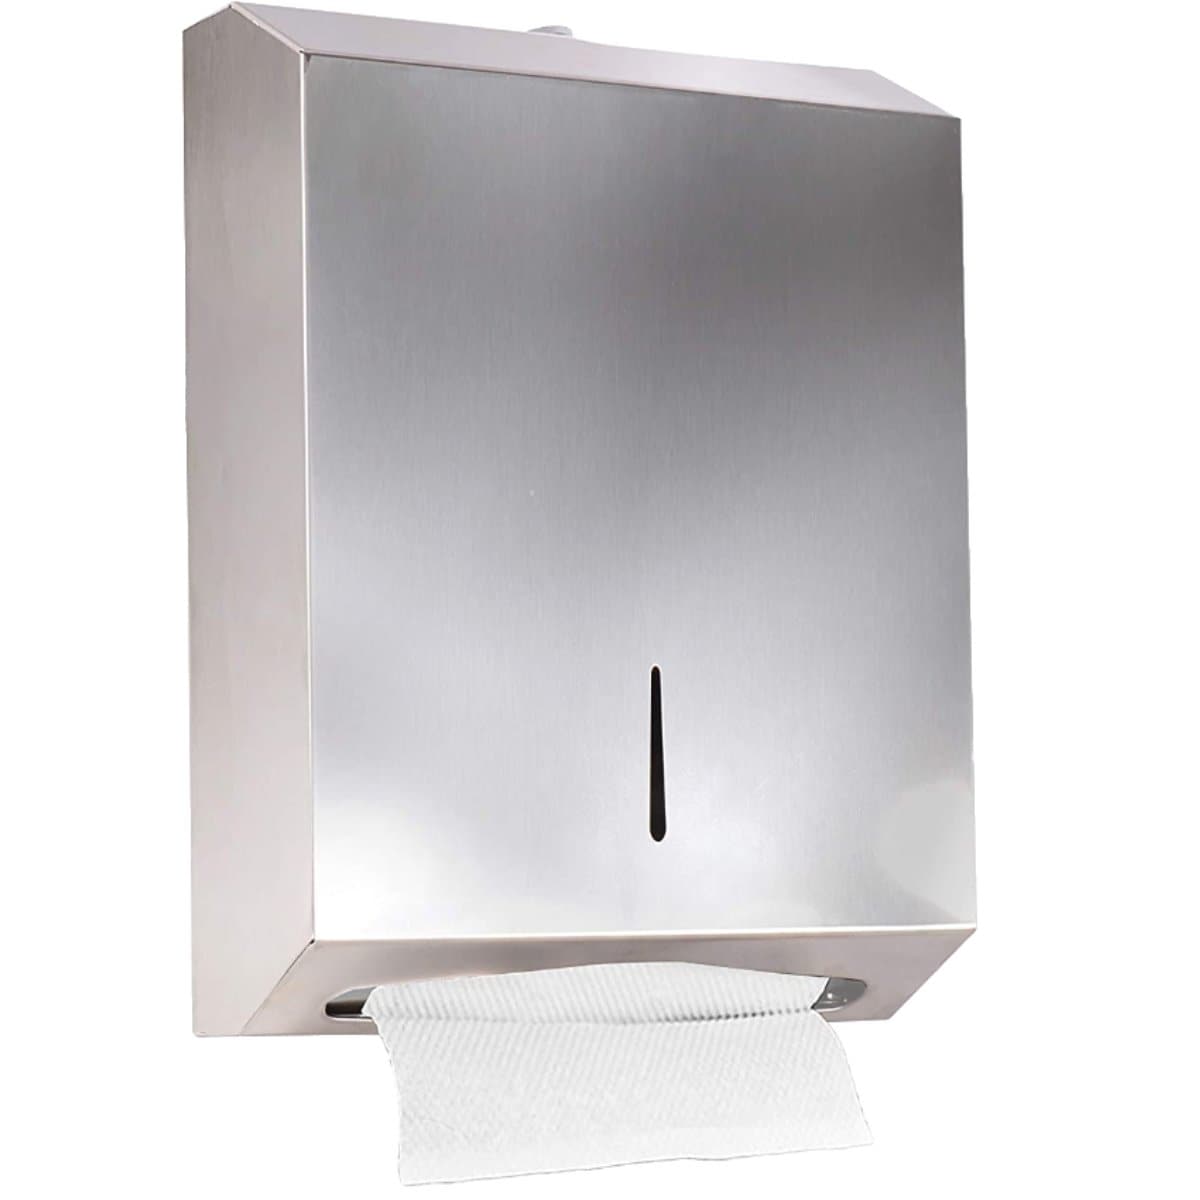 Stainless Steel C-Fold Towel Dispenser, 37 x 28 x 10 cm, Brushed